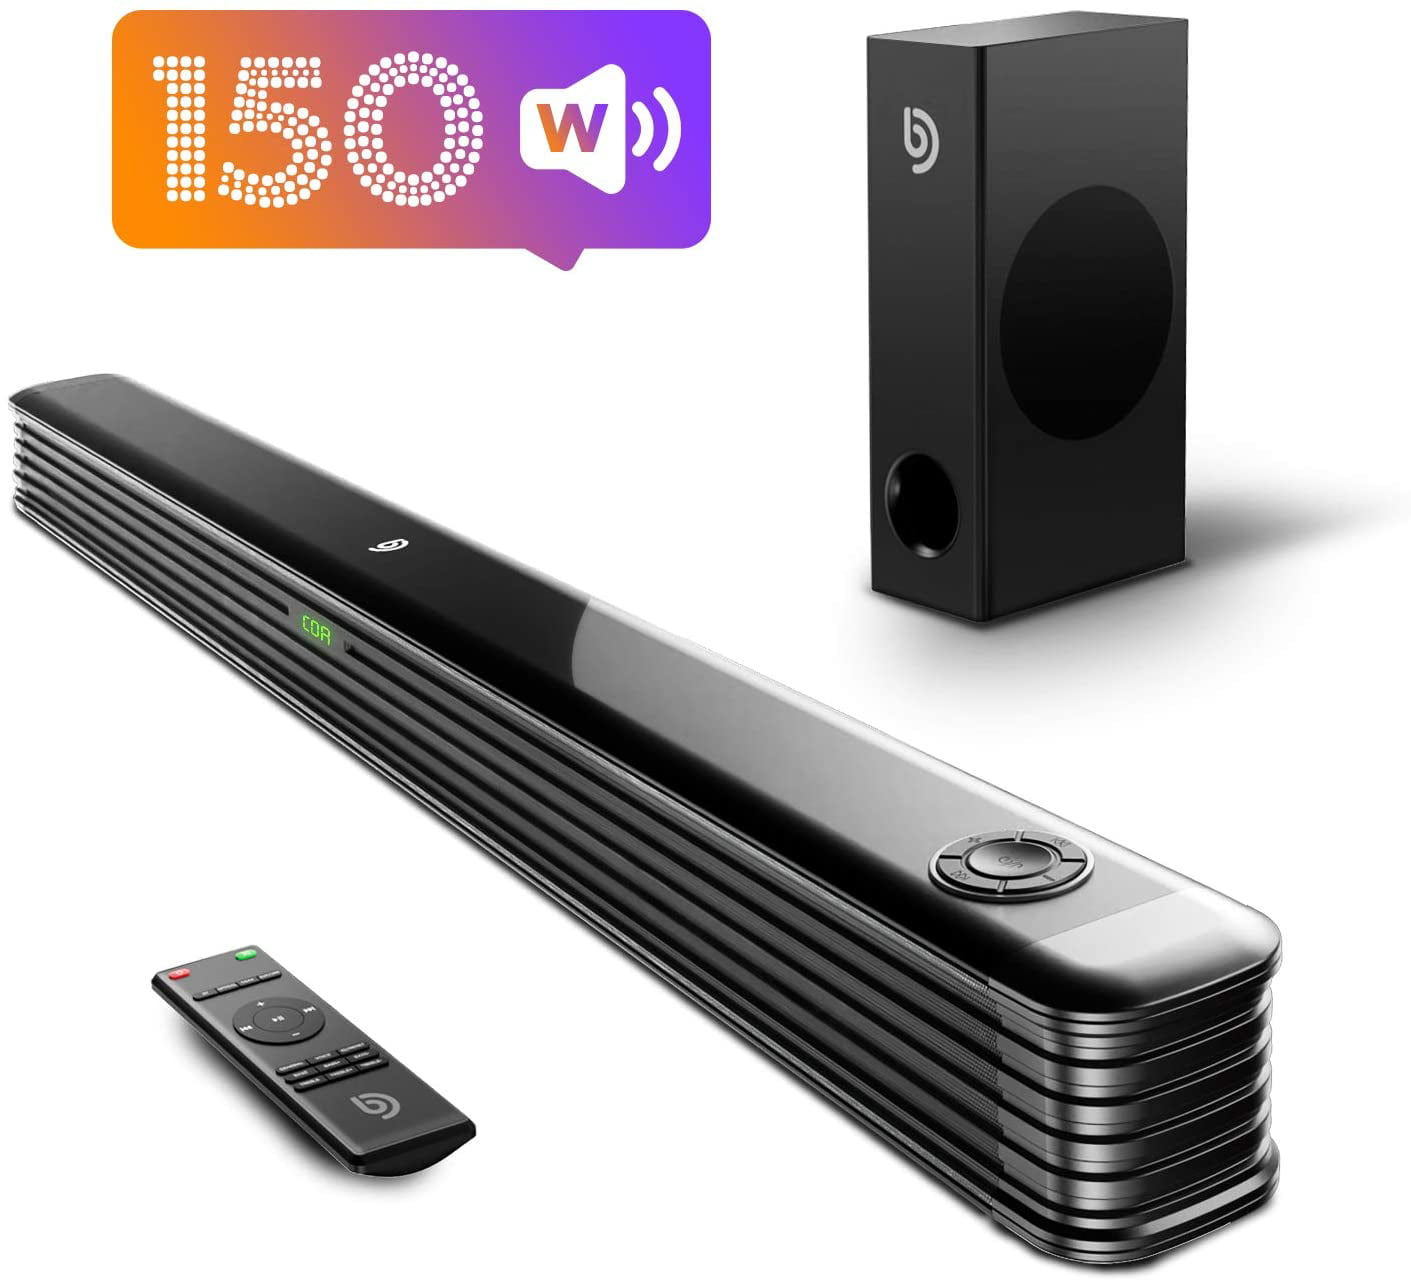 Ultra Slim 2.1 CH Sound Bar for TV Deep Bass 5 EQ Modes Bomaker Soundbar with Subwoofer Optical and RCA Cables Included